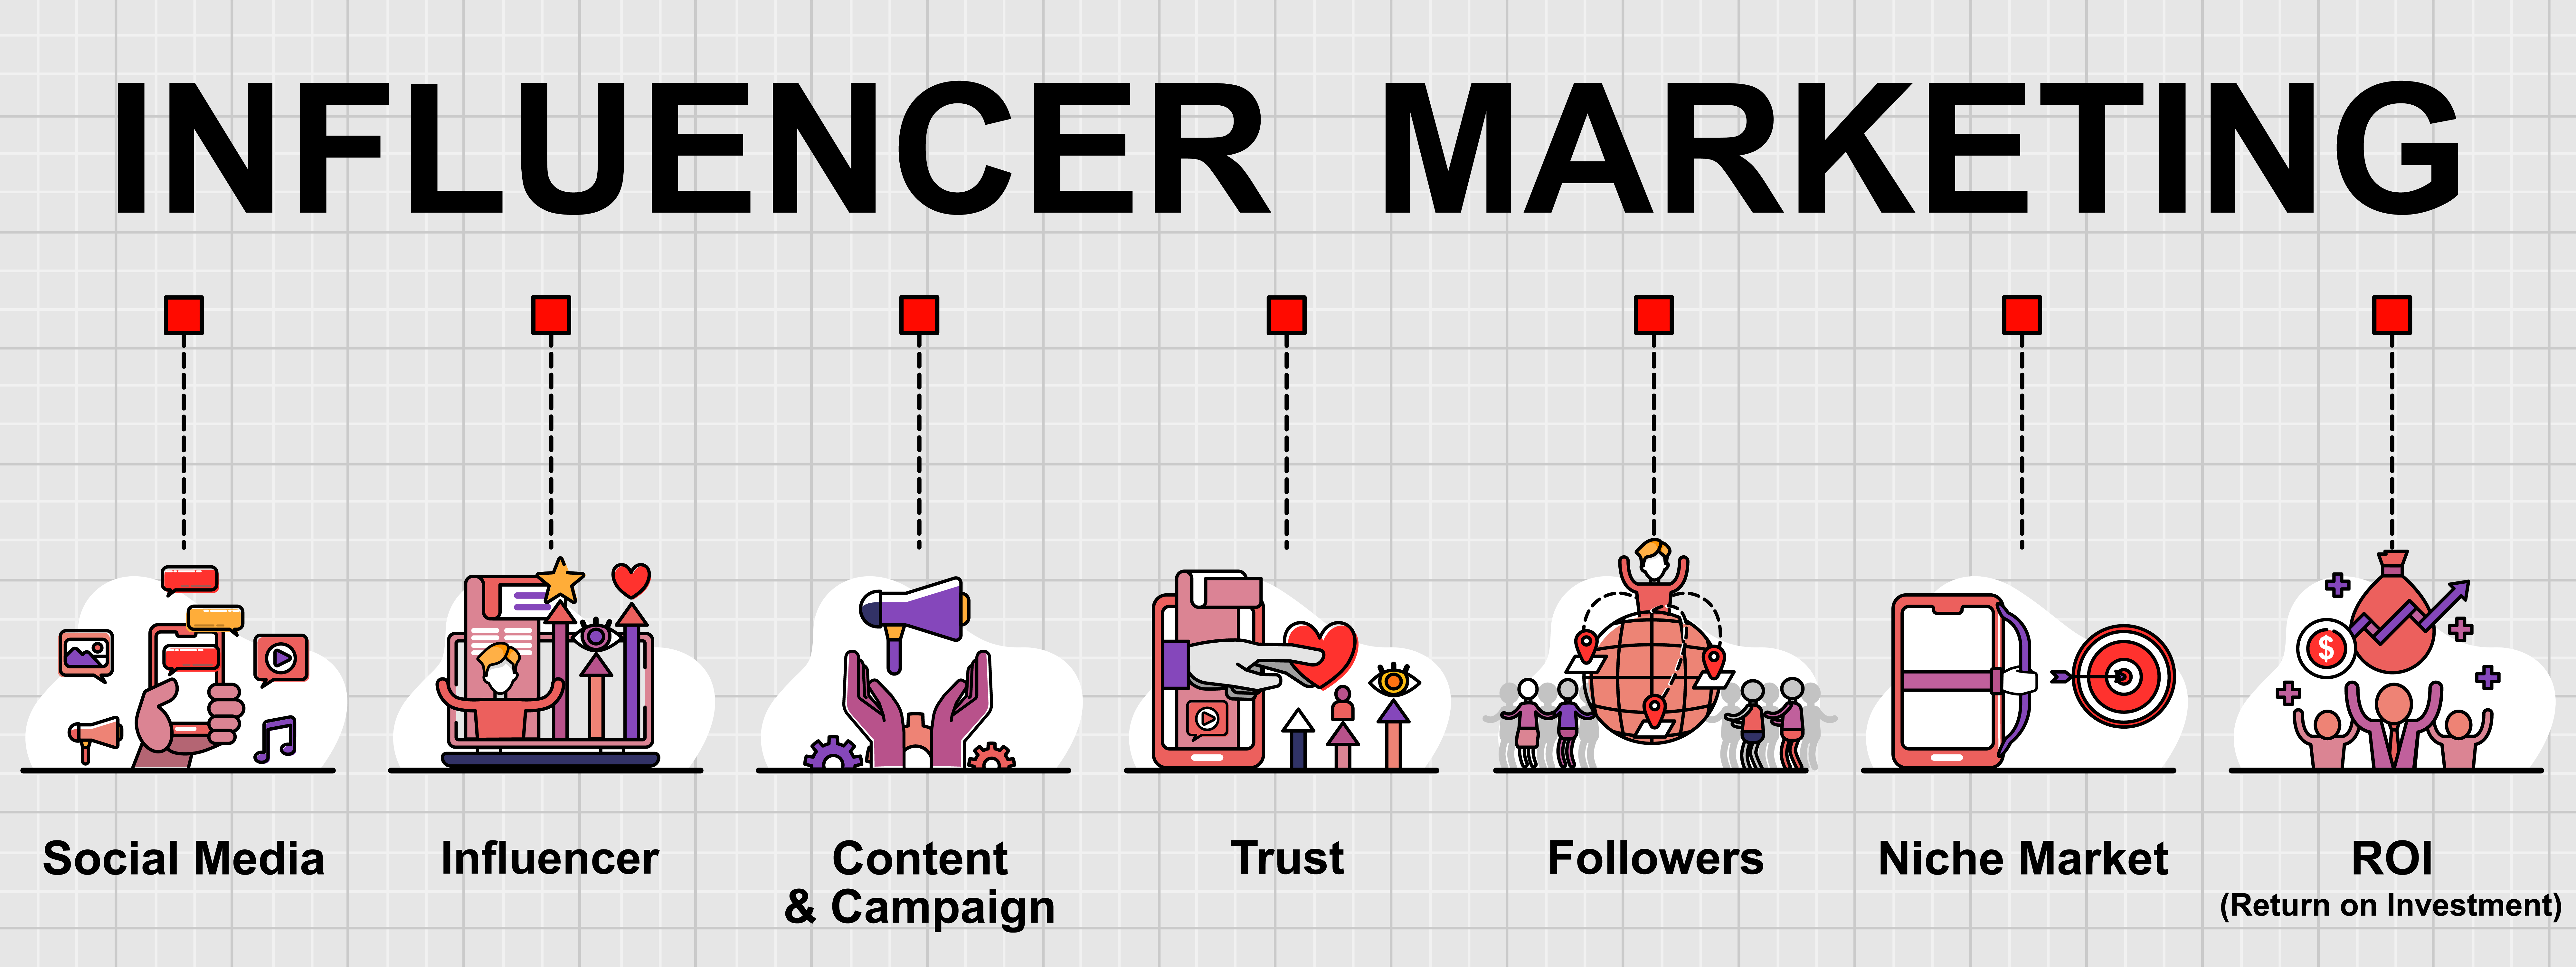 An illustration depicting the different stages in influencer marketing, starting with social media and ending with ROI